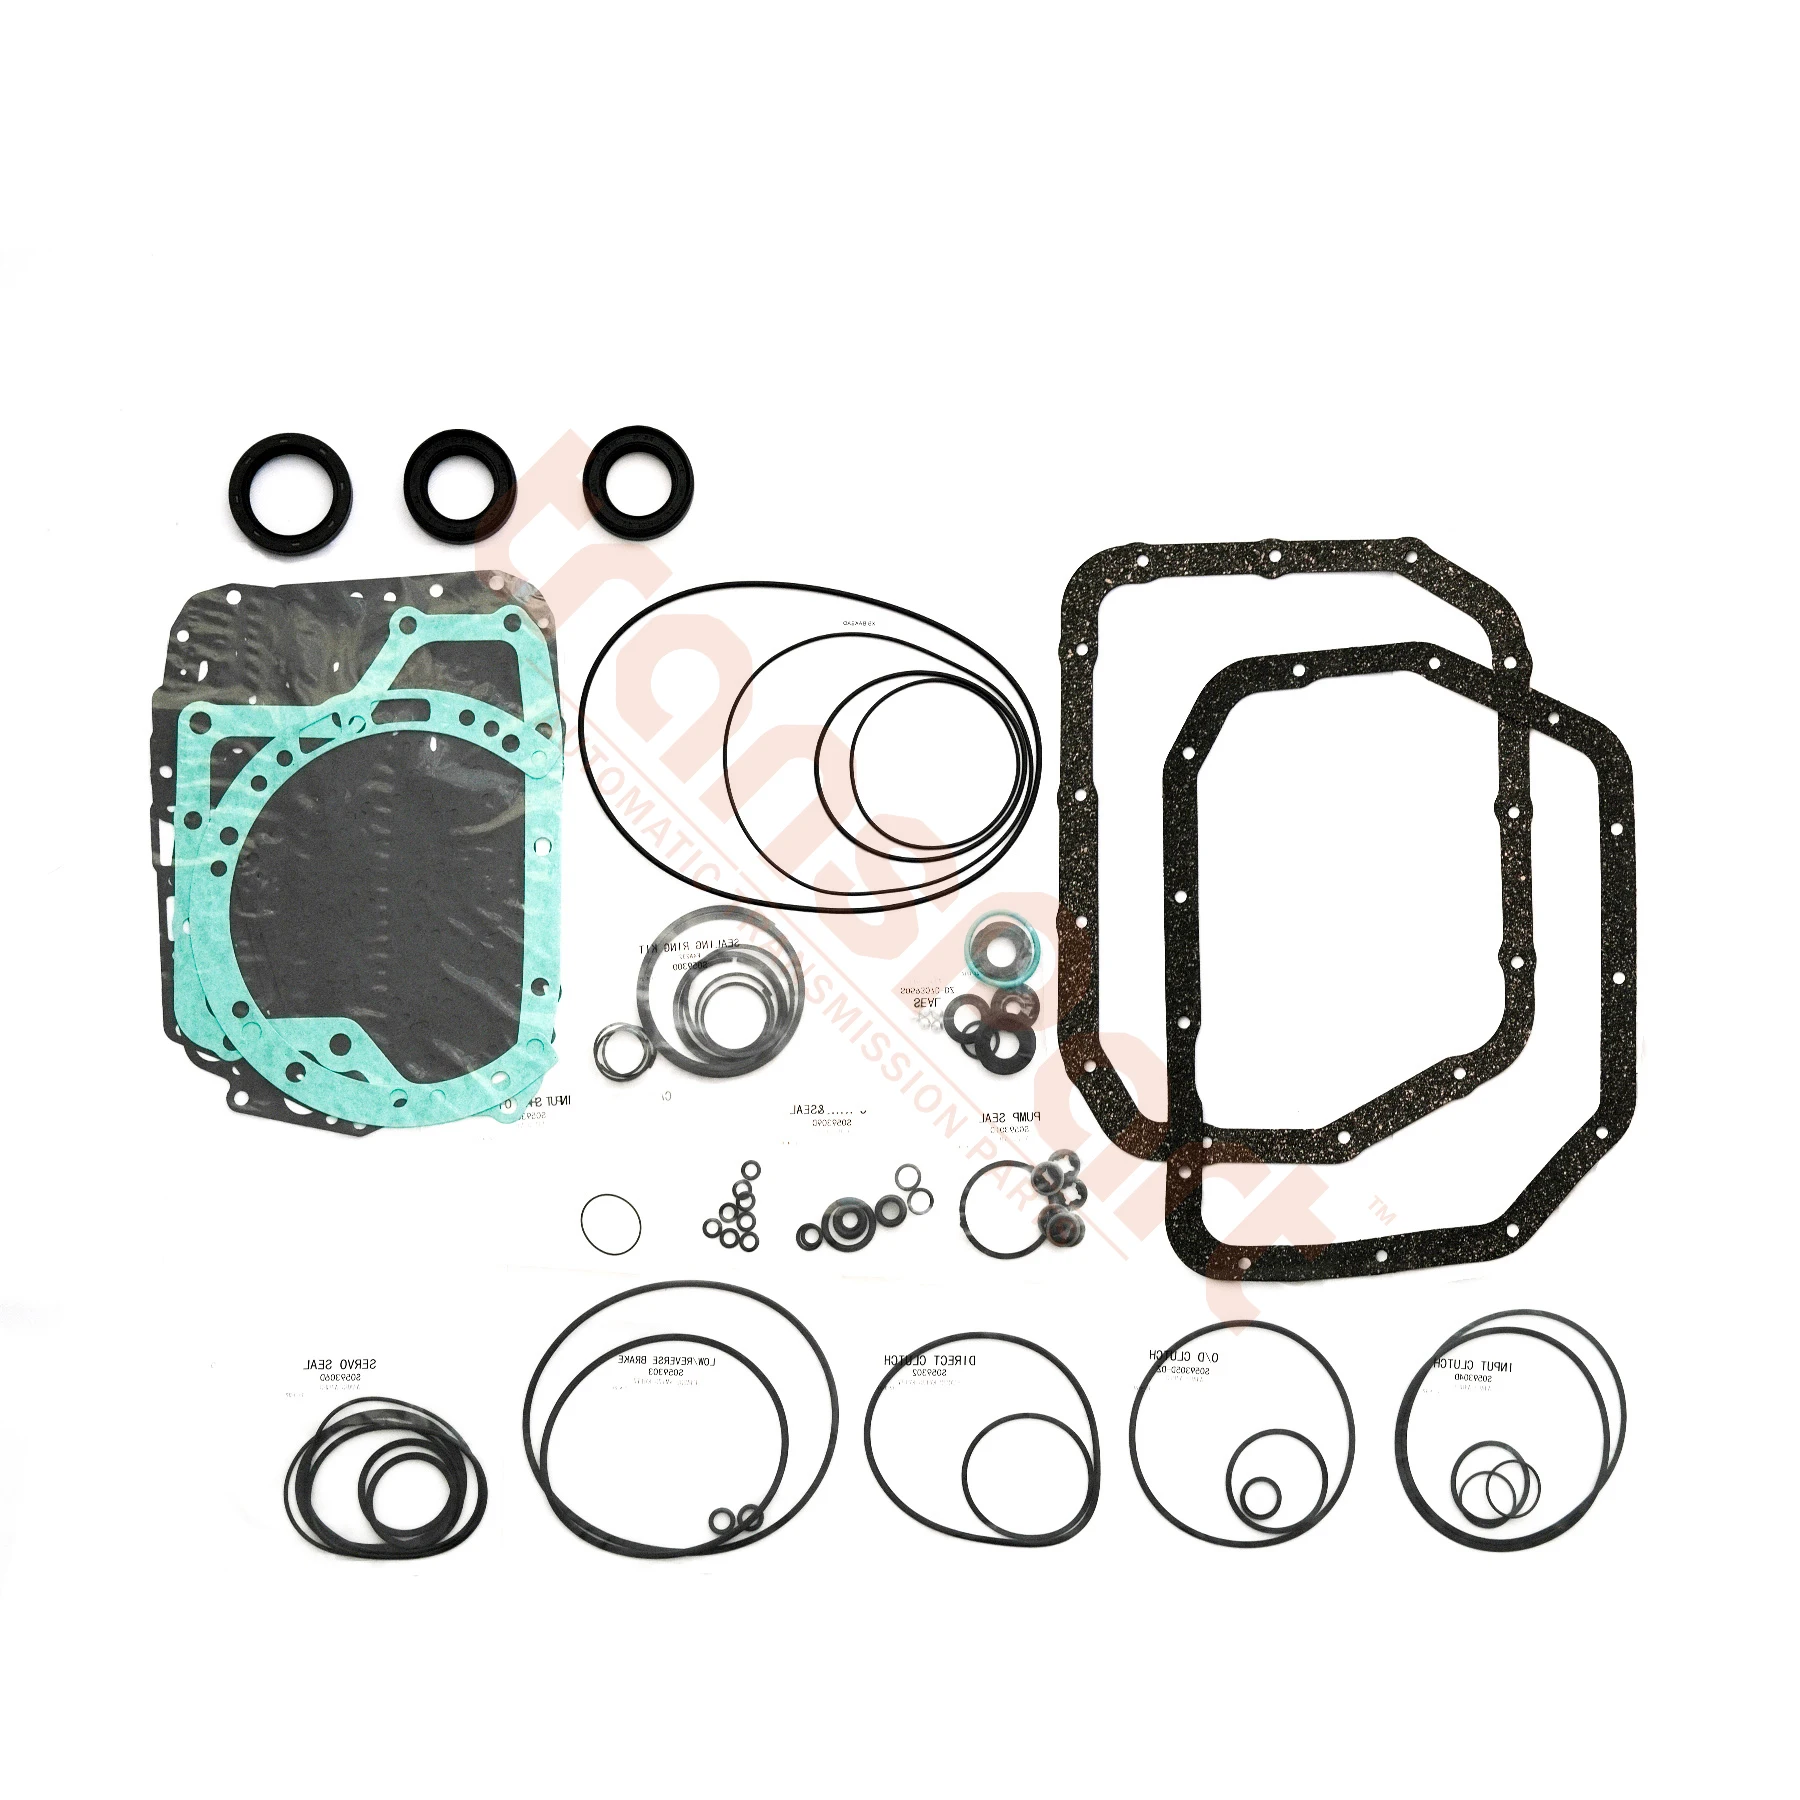 Details about    for Hyundai a4bf3 overhaul kit gasket set with rings and seals 2000 